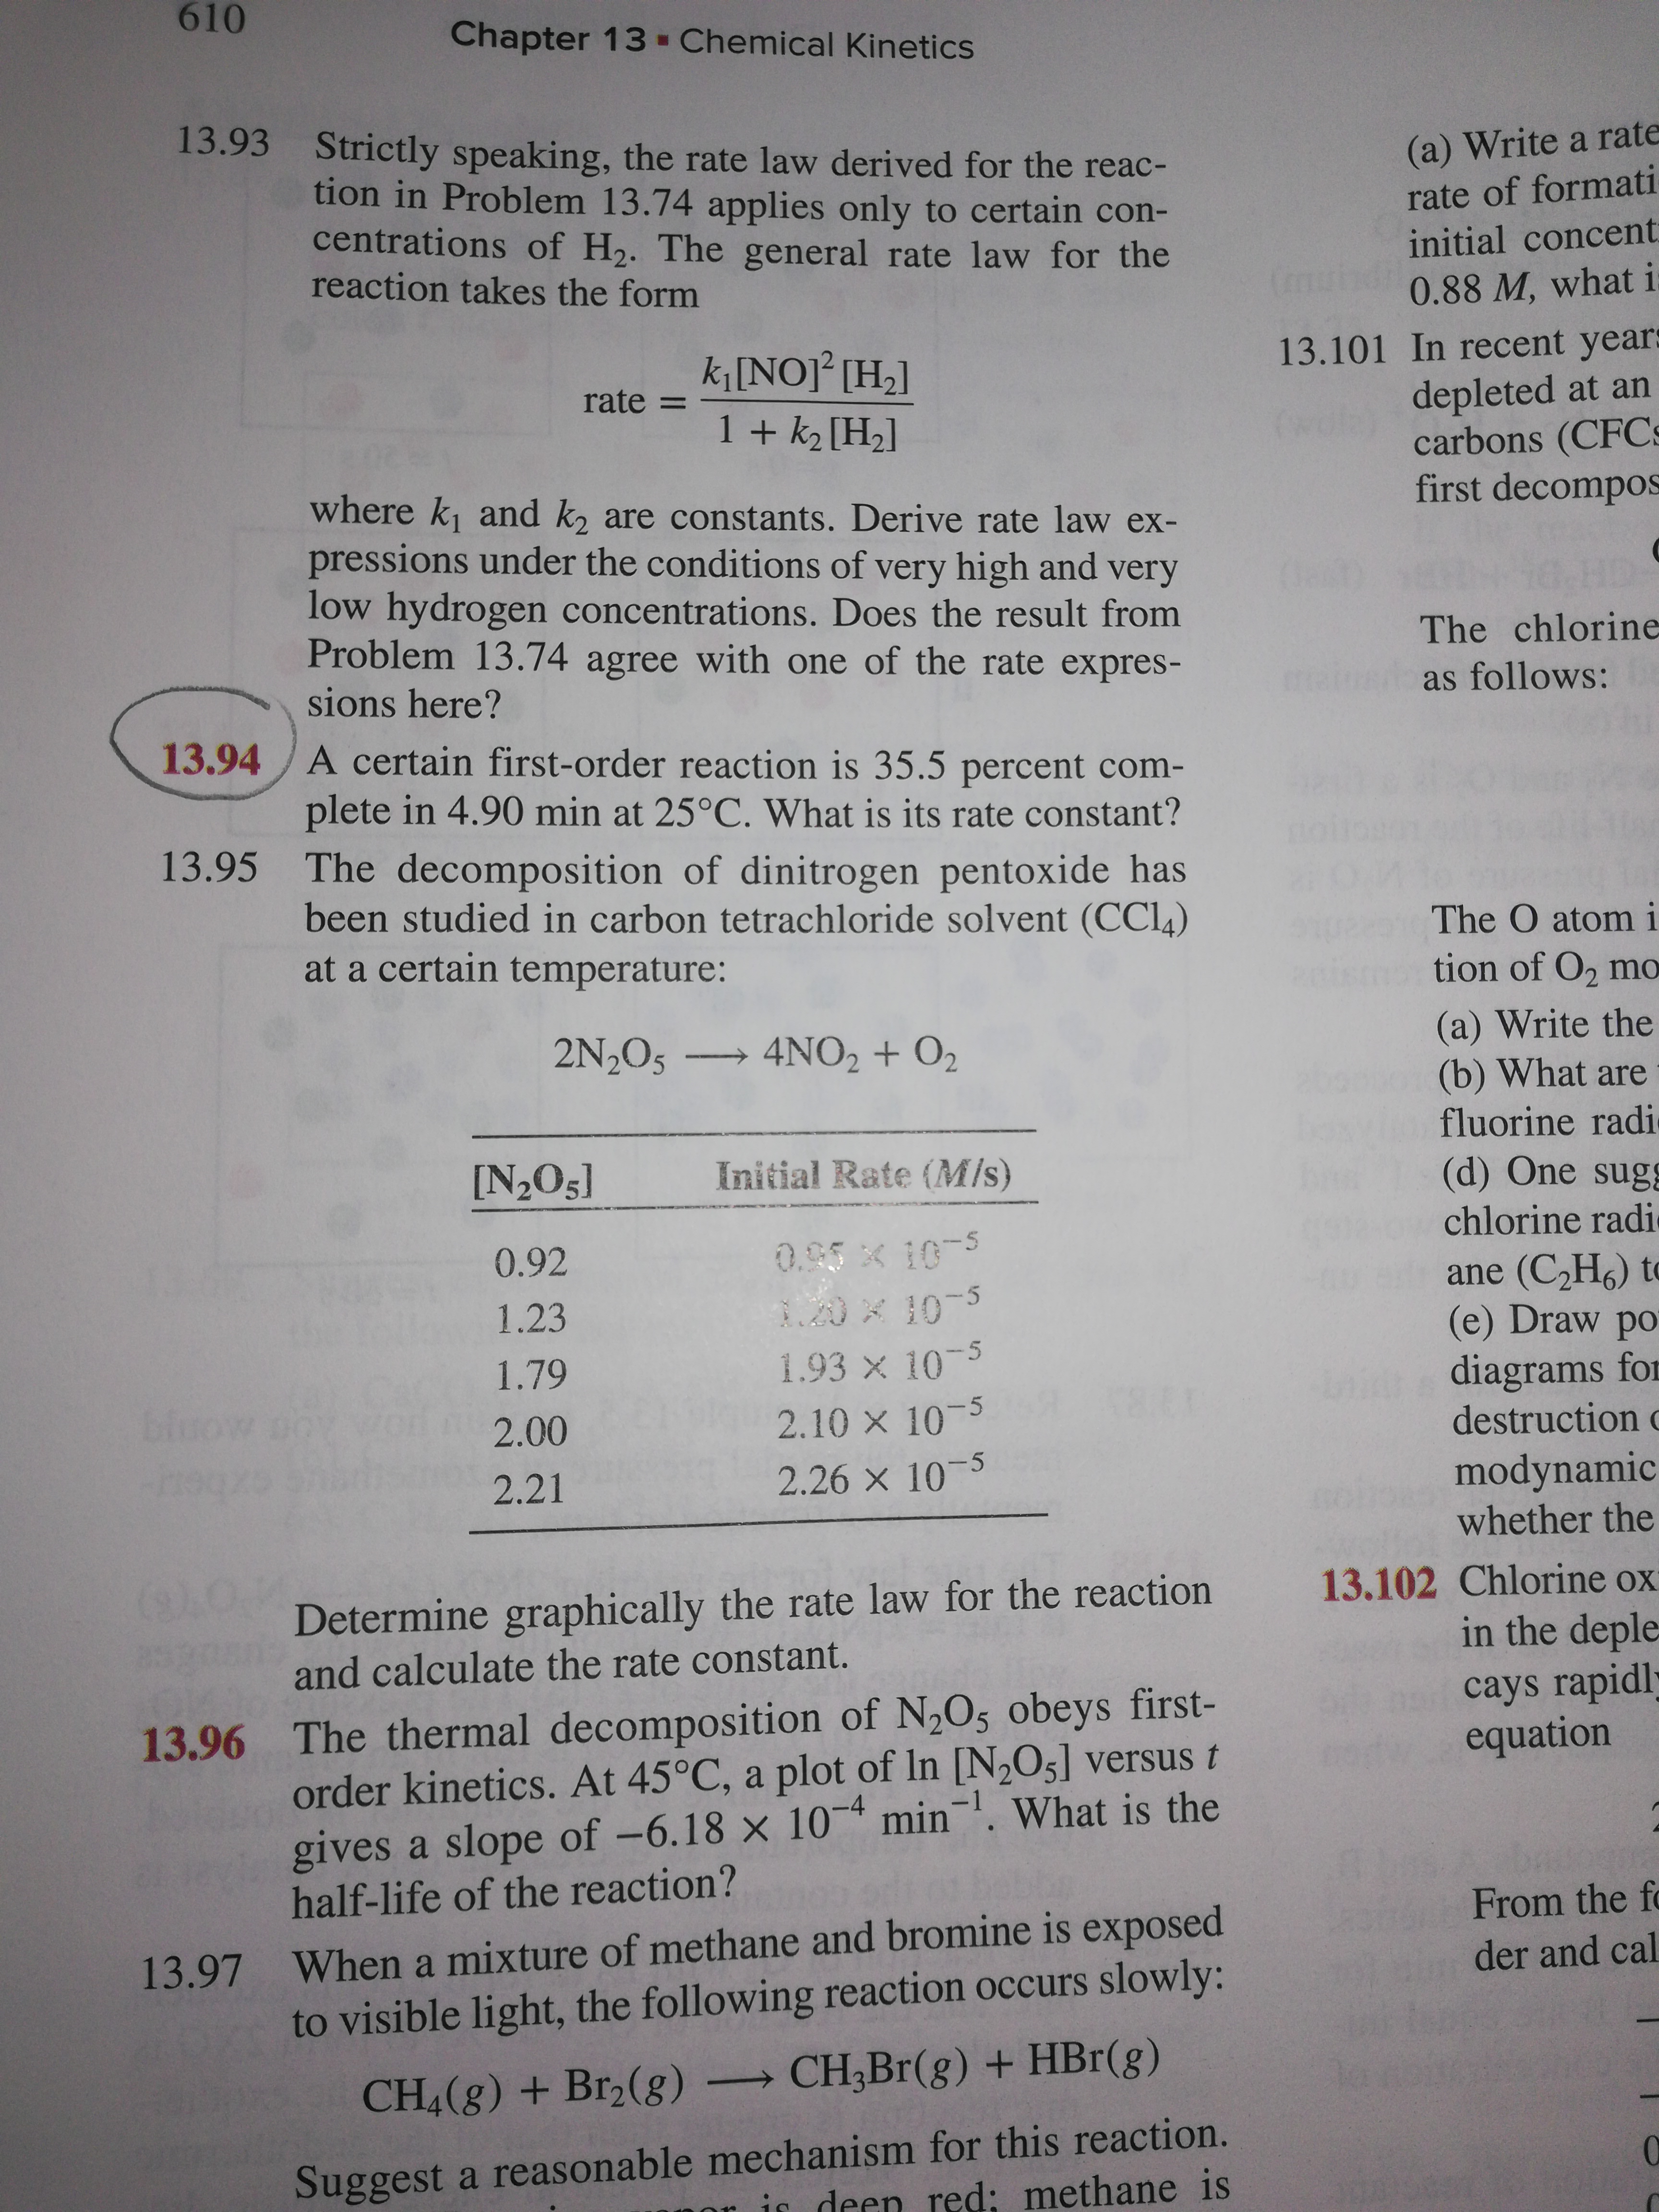 610
Chapter 13 -Chemical Kinetics
13.93 Strictly speaking, the rate law derived for the reac-
(a) Write a rate
rate of formati
tion in Problem 13.74 applies only to certain con-
centrations of H2. The general rate law for the
reaction takes the form
initial concent
(mu
0.88 M, what i
13.101 In recent years
depleted at an
carbons (CFC:
first decompos
k[NO]² [H2]
rate =
1 + k2 [H2]
where k and k, are constants. Derive rate law ex-
pressions under the conditions of very high and very
low hydrogen concentrations. Does the result from
Problem 13.74 agree with one of the rate expres-
The chlorine
sions here?
as follows:
13.94/A certain first-order reaction is 35.5 percent com-
plete in 4.90 min at 25°C. What is its rate constant?
13.95 The decomposition of dinitrogen pentoxide has
been studied in carbon tetrachloride solvent (CCl4)
at a certain temperature:
The O atom i
tion of O2 mo
(a) Write the
(b) What are
fluorine radi
(d) One sug
chlorine radi
ane (C,H6) to
(e) Draw po
2N,O5 4NO2 + O2
[N,O5]
Initial Rate (MIs)
0.92
0.65 x 10-5
1.23
1.93 x 10-5
2.10 x 10-5
1.79
diagrams for
destruction c
bluow
2.00
2.26 x 10-5
modynamic
whether the
2.21
Determine graphically the rate law for the reaction
and calculate the rate constant.
13.102 Chlorine ox
in the deple
cays rapidly
equation
13.96 The thermal decomposition of N,O5 obeys first-
order kinetics. At 45°C, a plot of In [N2O5] versus t
gives a slope of -6.18 x 10¬* min¬. What is the
half-life of the reaction?
From the fo
13.97 When a mixture of methane and bromine is exposed
to visible light, the following reaction occurs slowly:
der and cal
CH4(g) + Br2(g) CH;Br(g) + HBr(g)
Suggest a reasonable mechanism for this reaction.
is deen red: methane is
